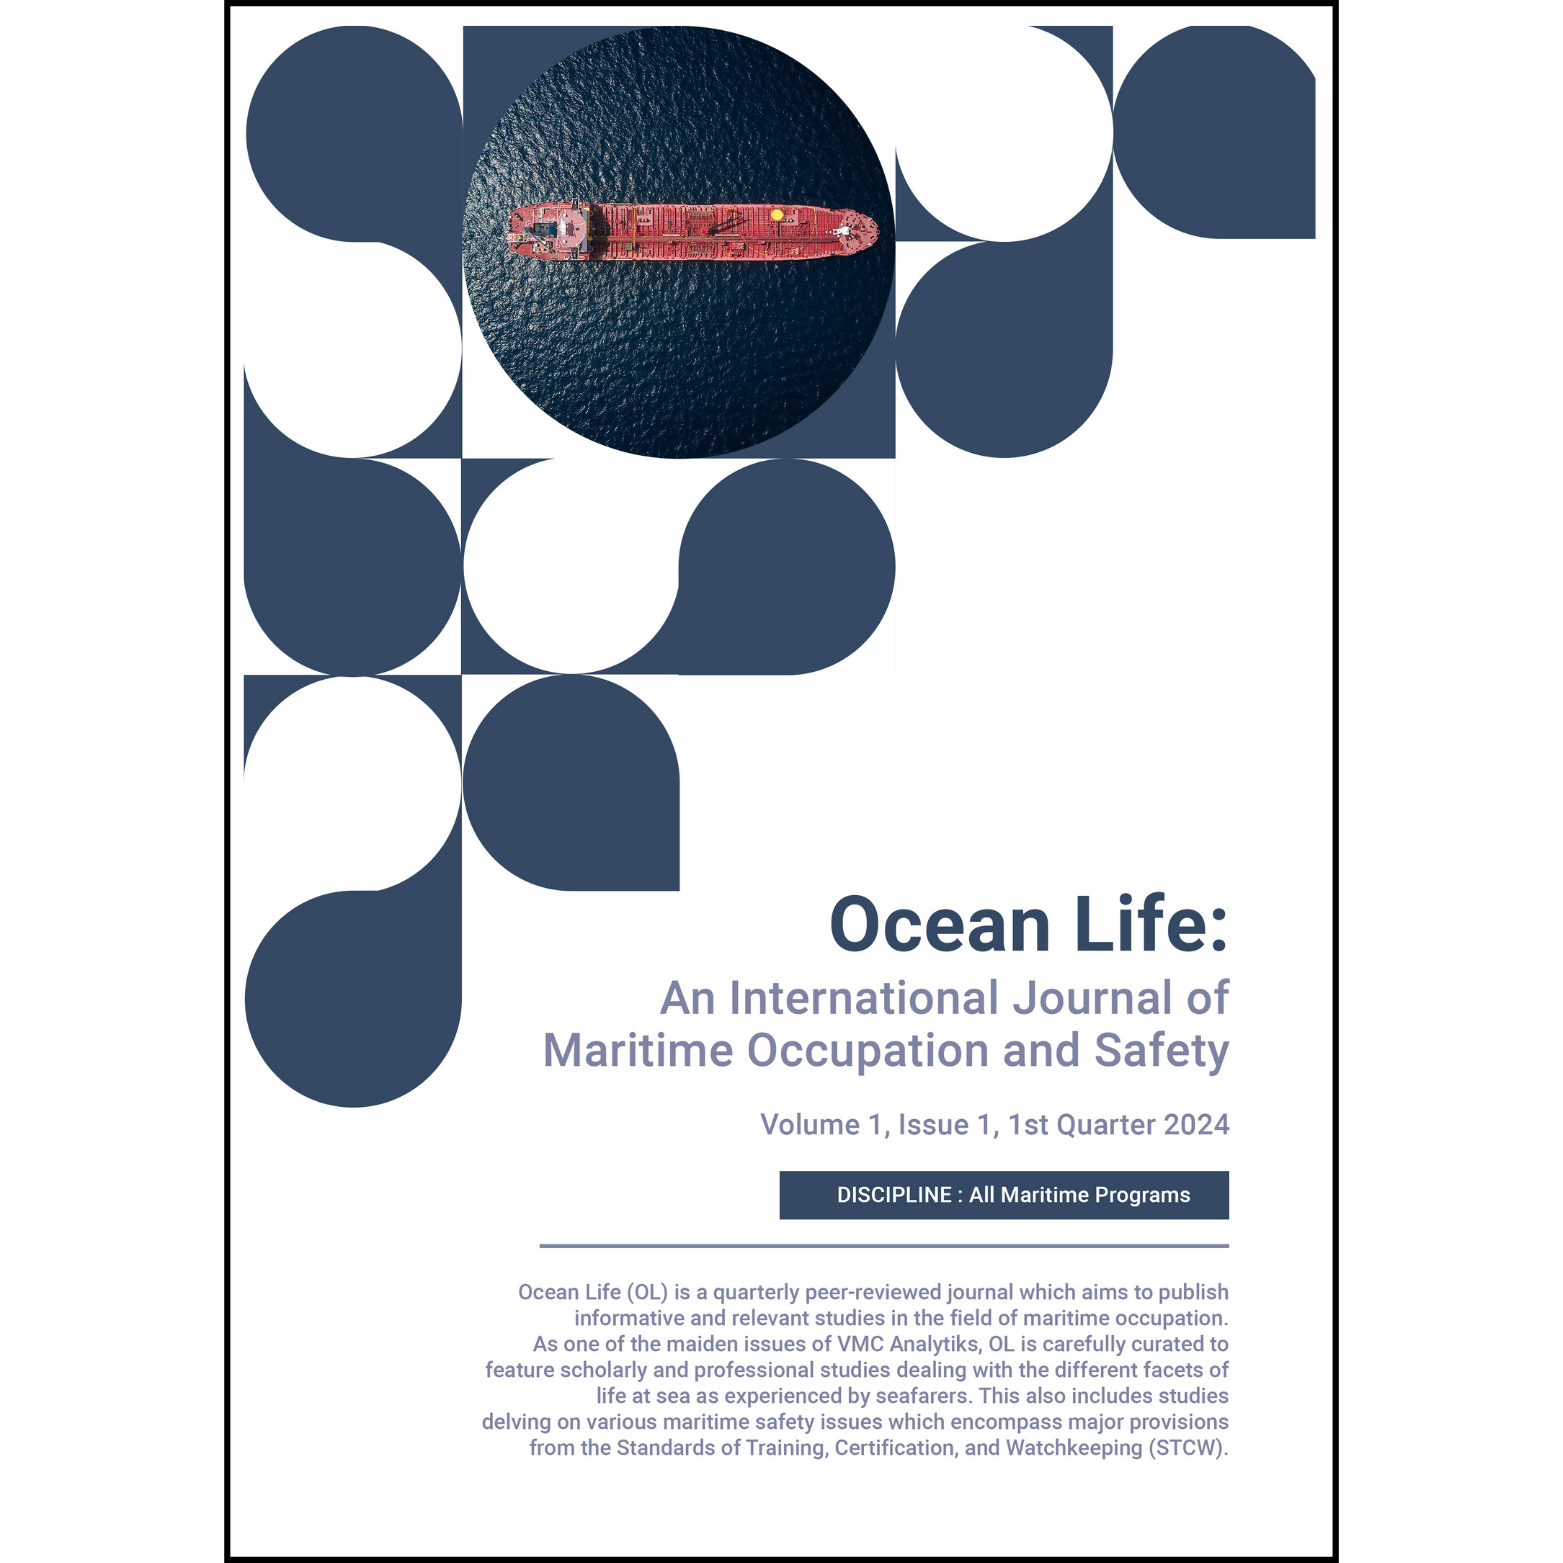 Ocean Life: An International Journal of Maritime Occupation and Safety